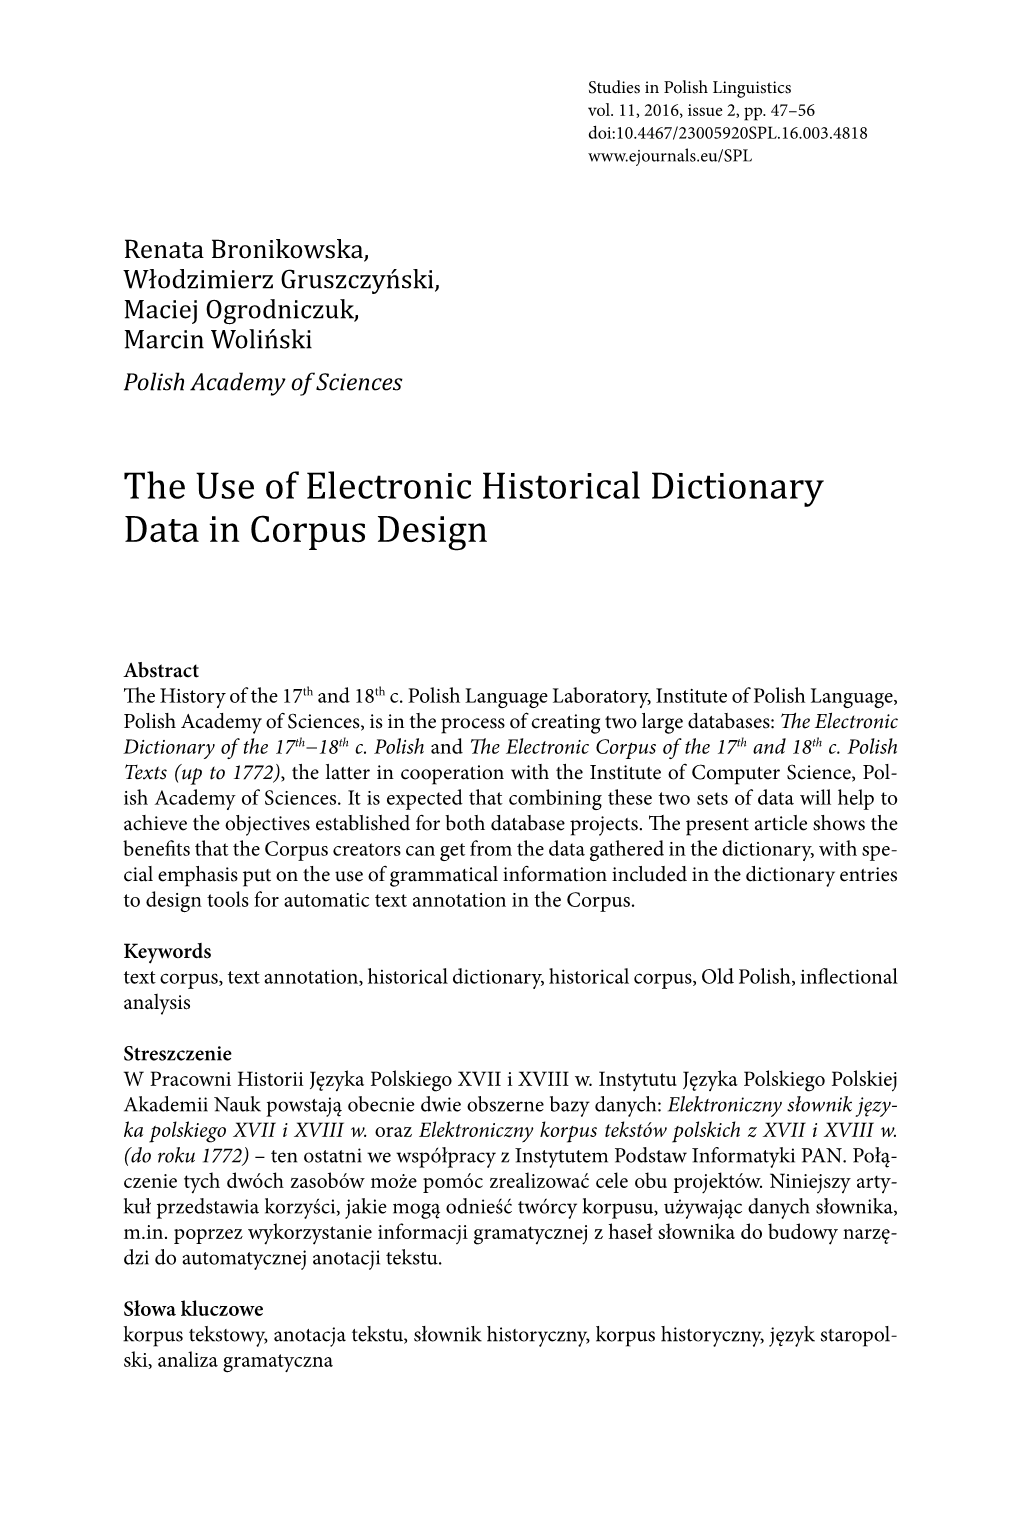 The Use of Electronic Historical Dictionary Data in Corpus Design